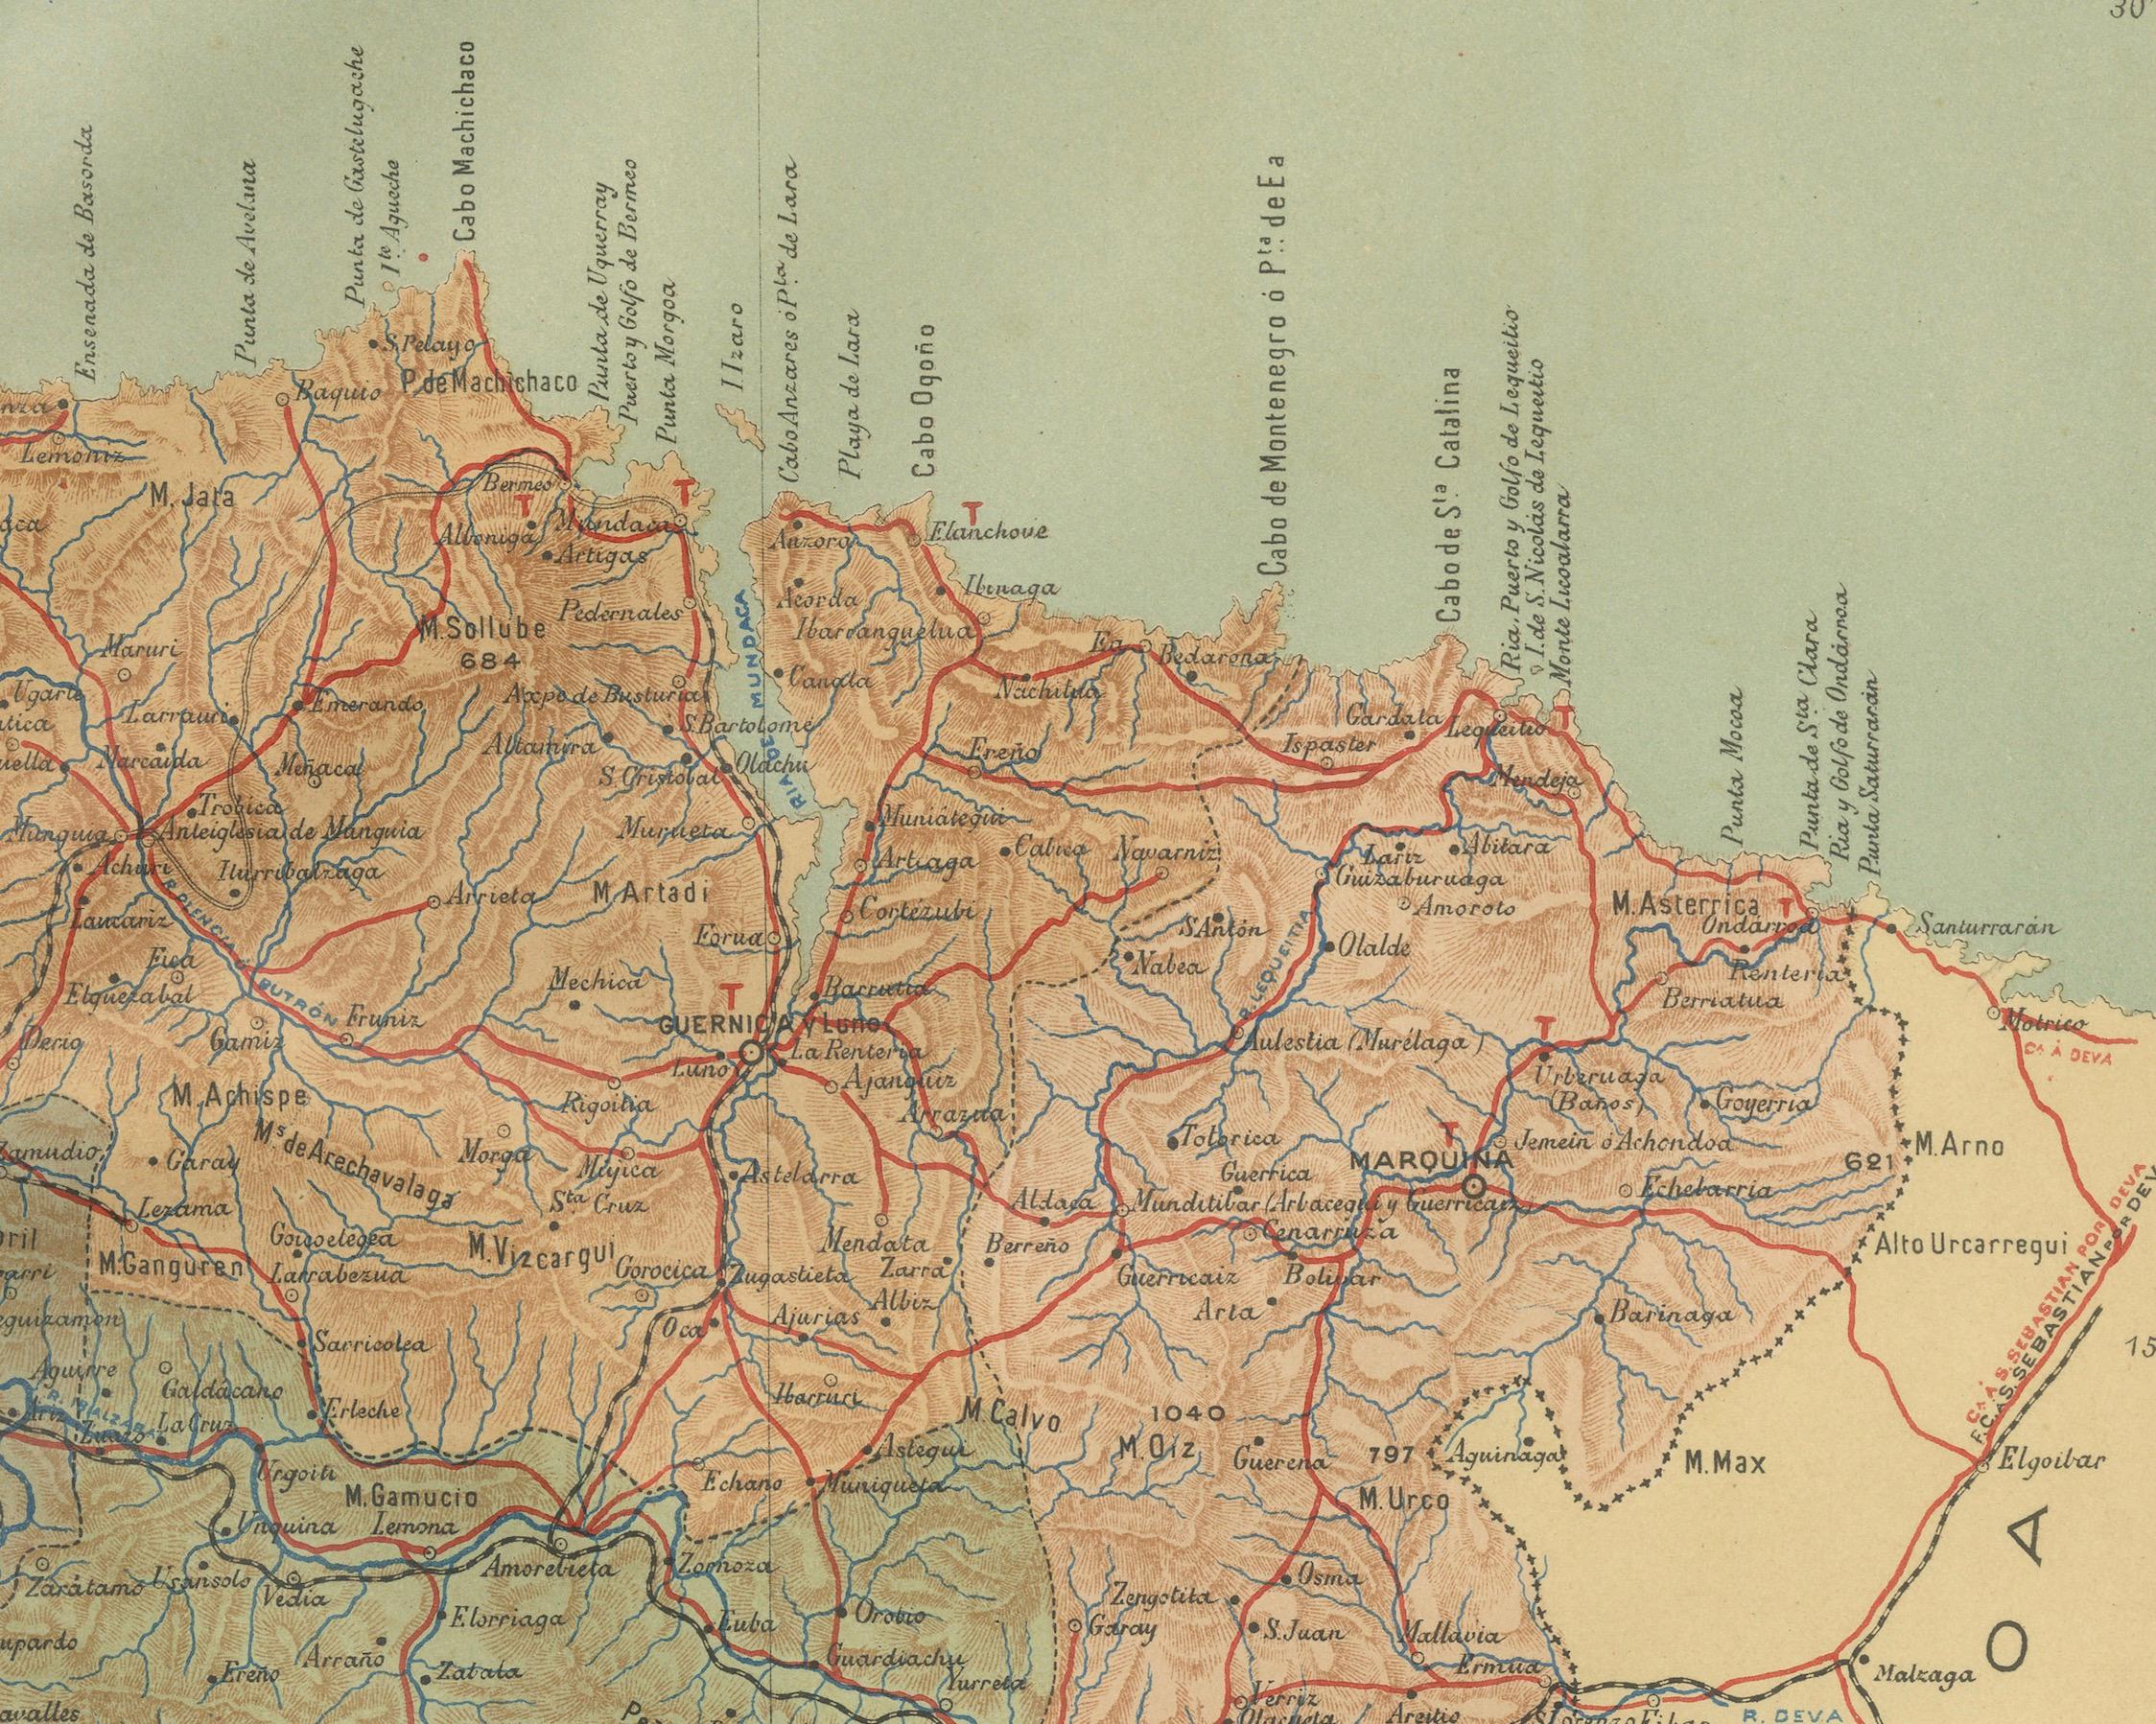 This is a historical map of the province of Vizcaya (Biscay) in Spain, dated 1901. The title on the map is 